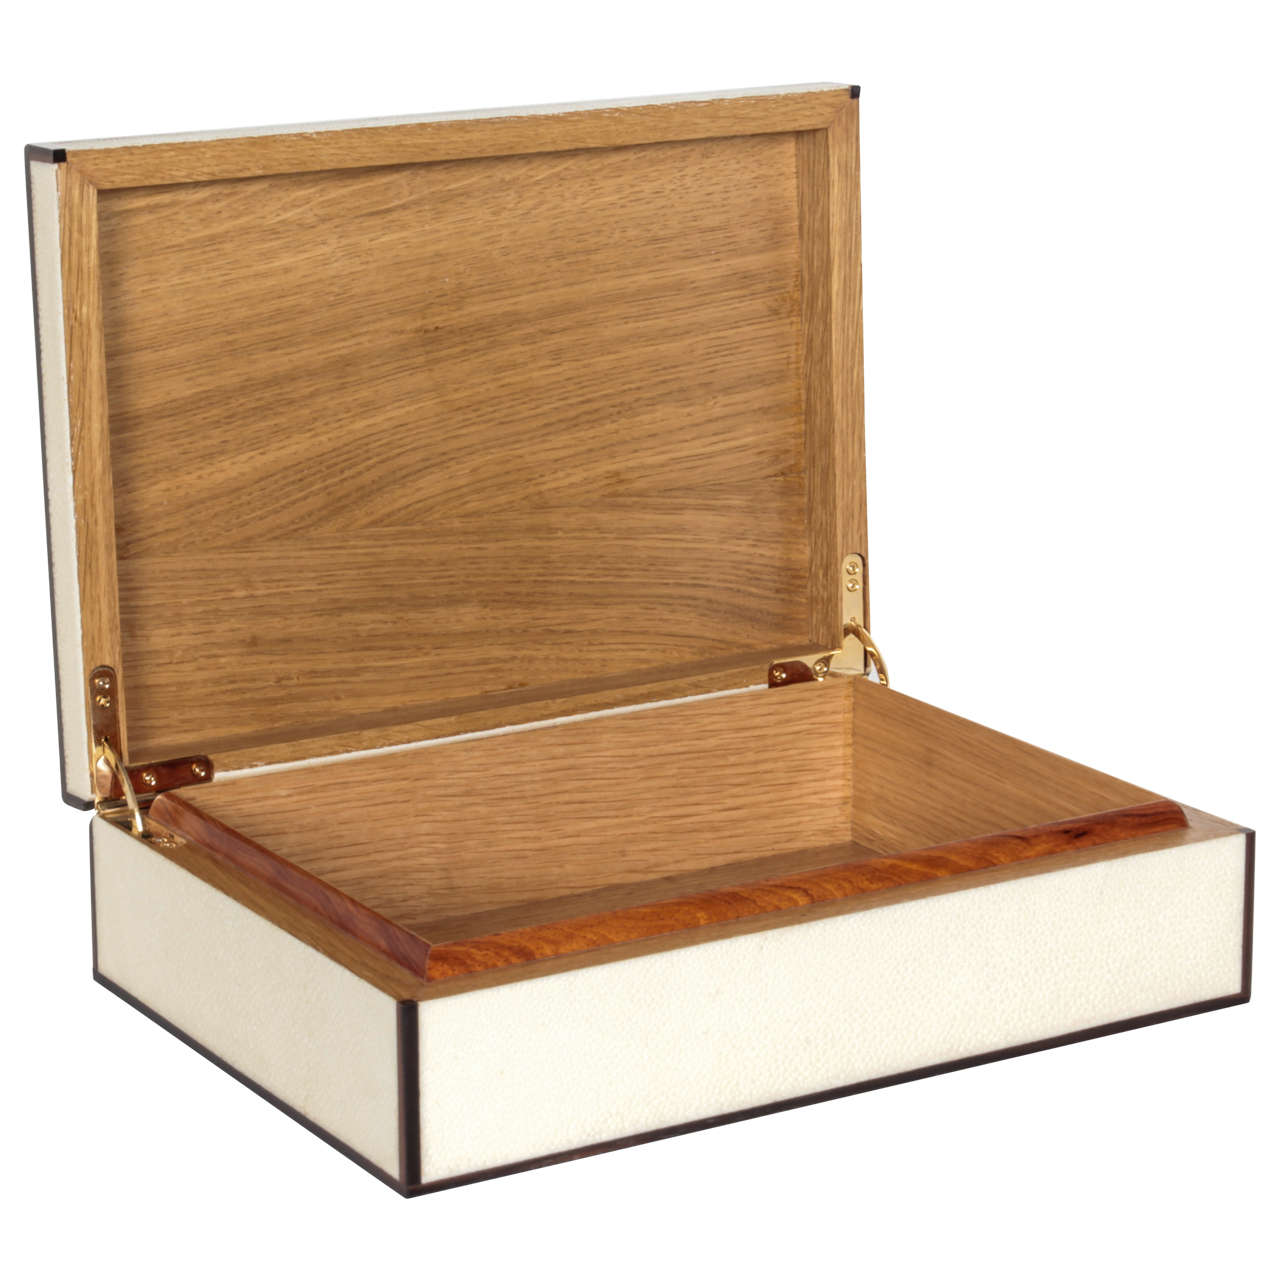 A beautiful shagreen box in natural stingray with ebony wood trim. Hinged, with a wood interior.